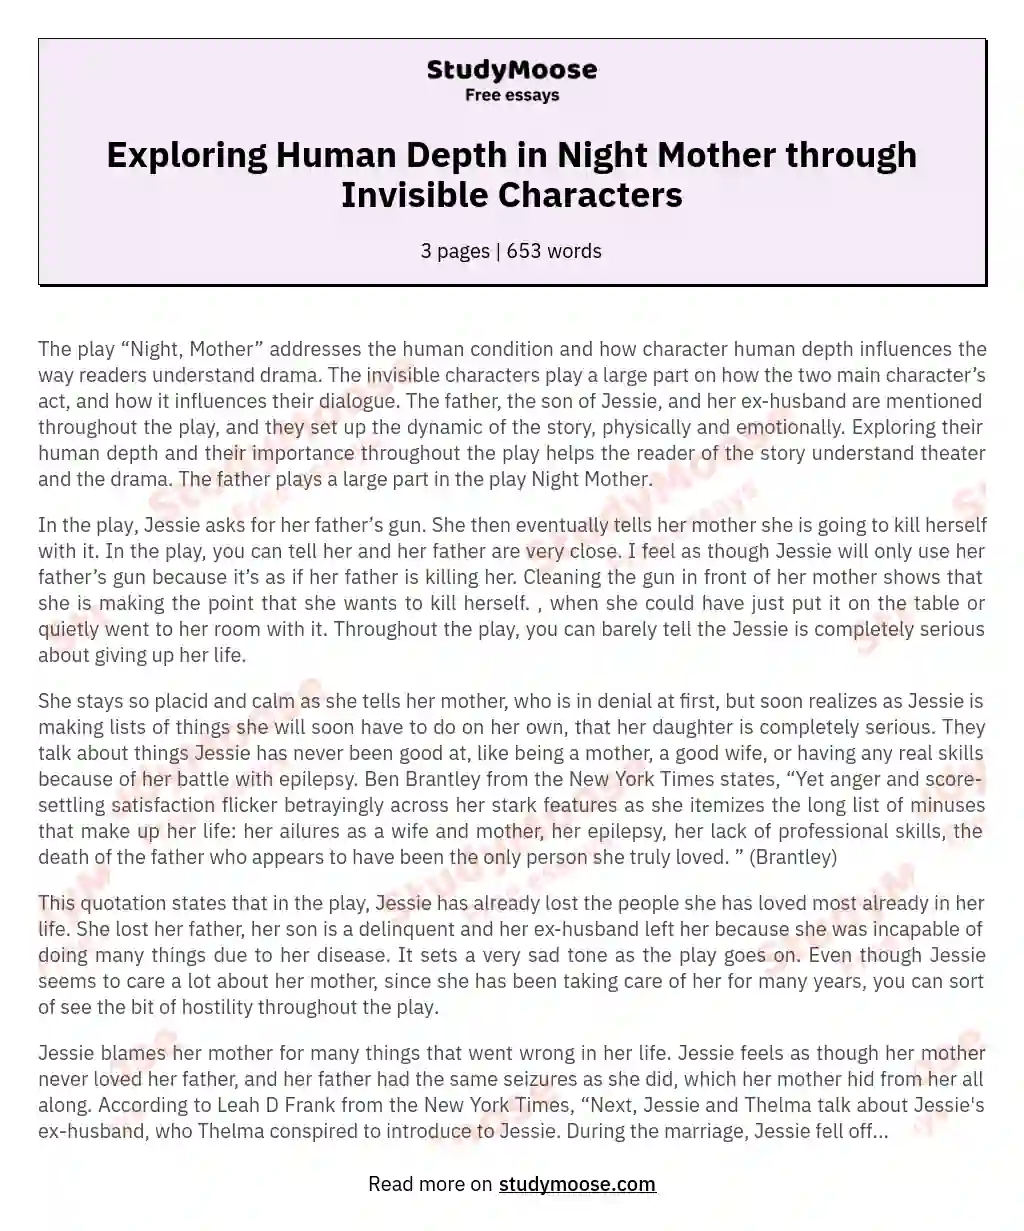 Exploring Human Depth in Night Mother through Invisible Characters essay